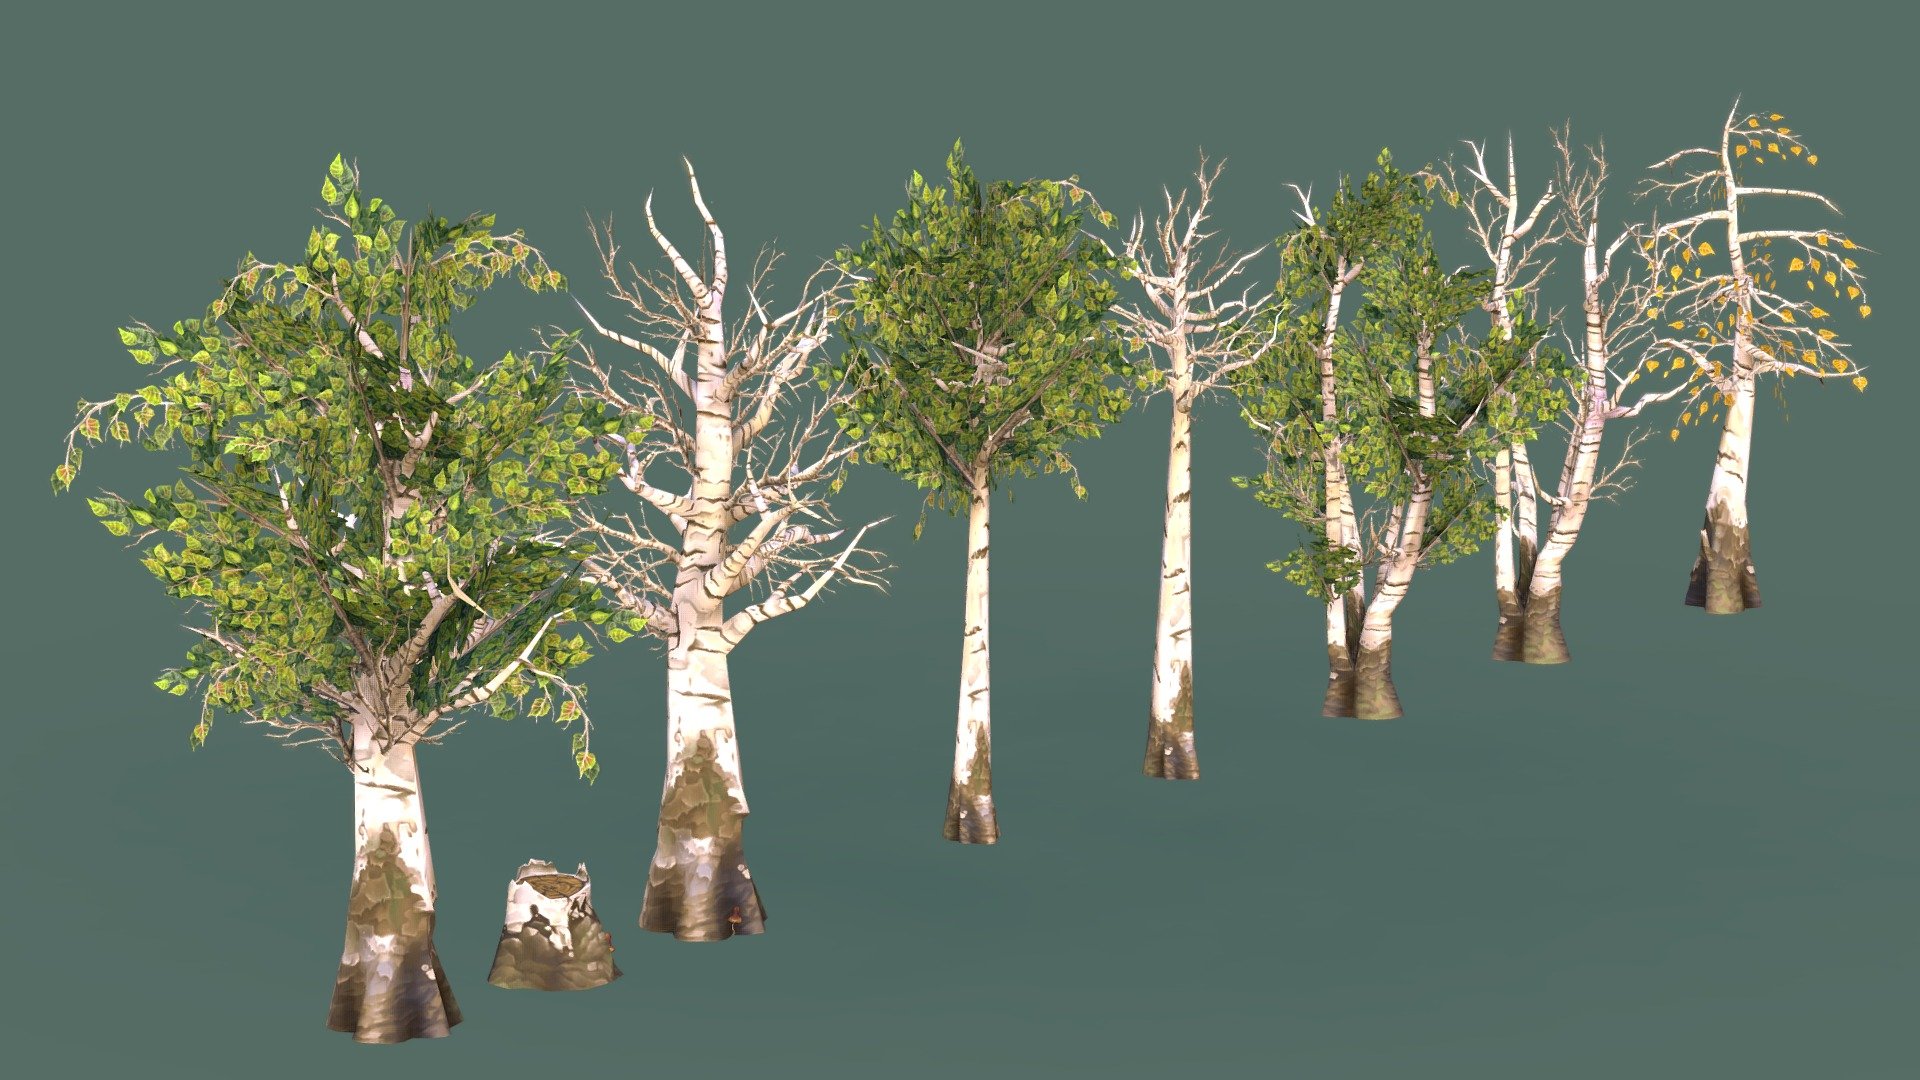 Stylized, hand-painted, low poly trees, well optimized for indie game developers. It contains:

1 Large Birch Tree
1 Large Dead birch Tree
1 Medium Birch Tree
1 Medium Dead birch Tree
1 Small Birch Tree
1 Small Dead birch Tree - Tree Set - Buy Royalty Free 3D model by BeardenInc 3d model